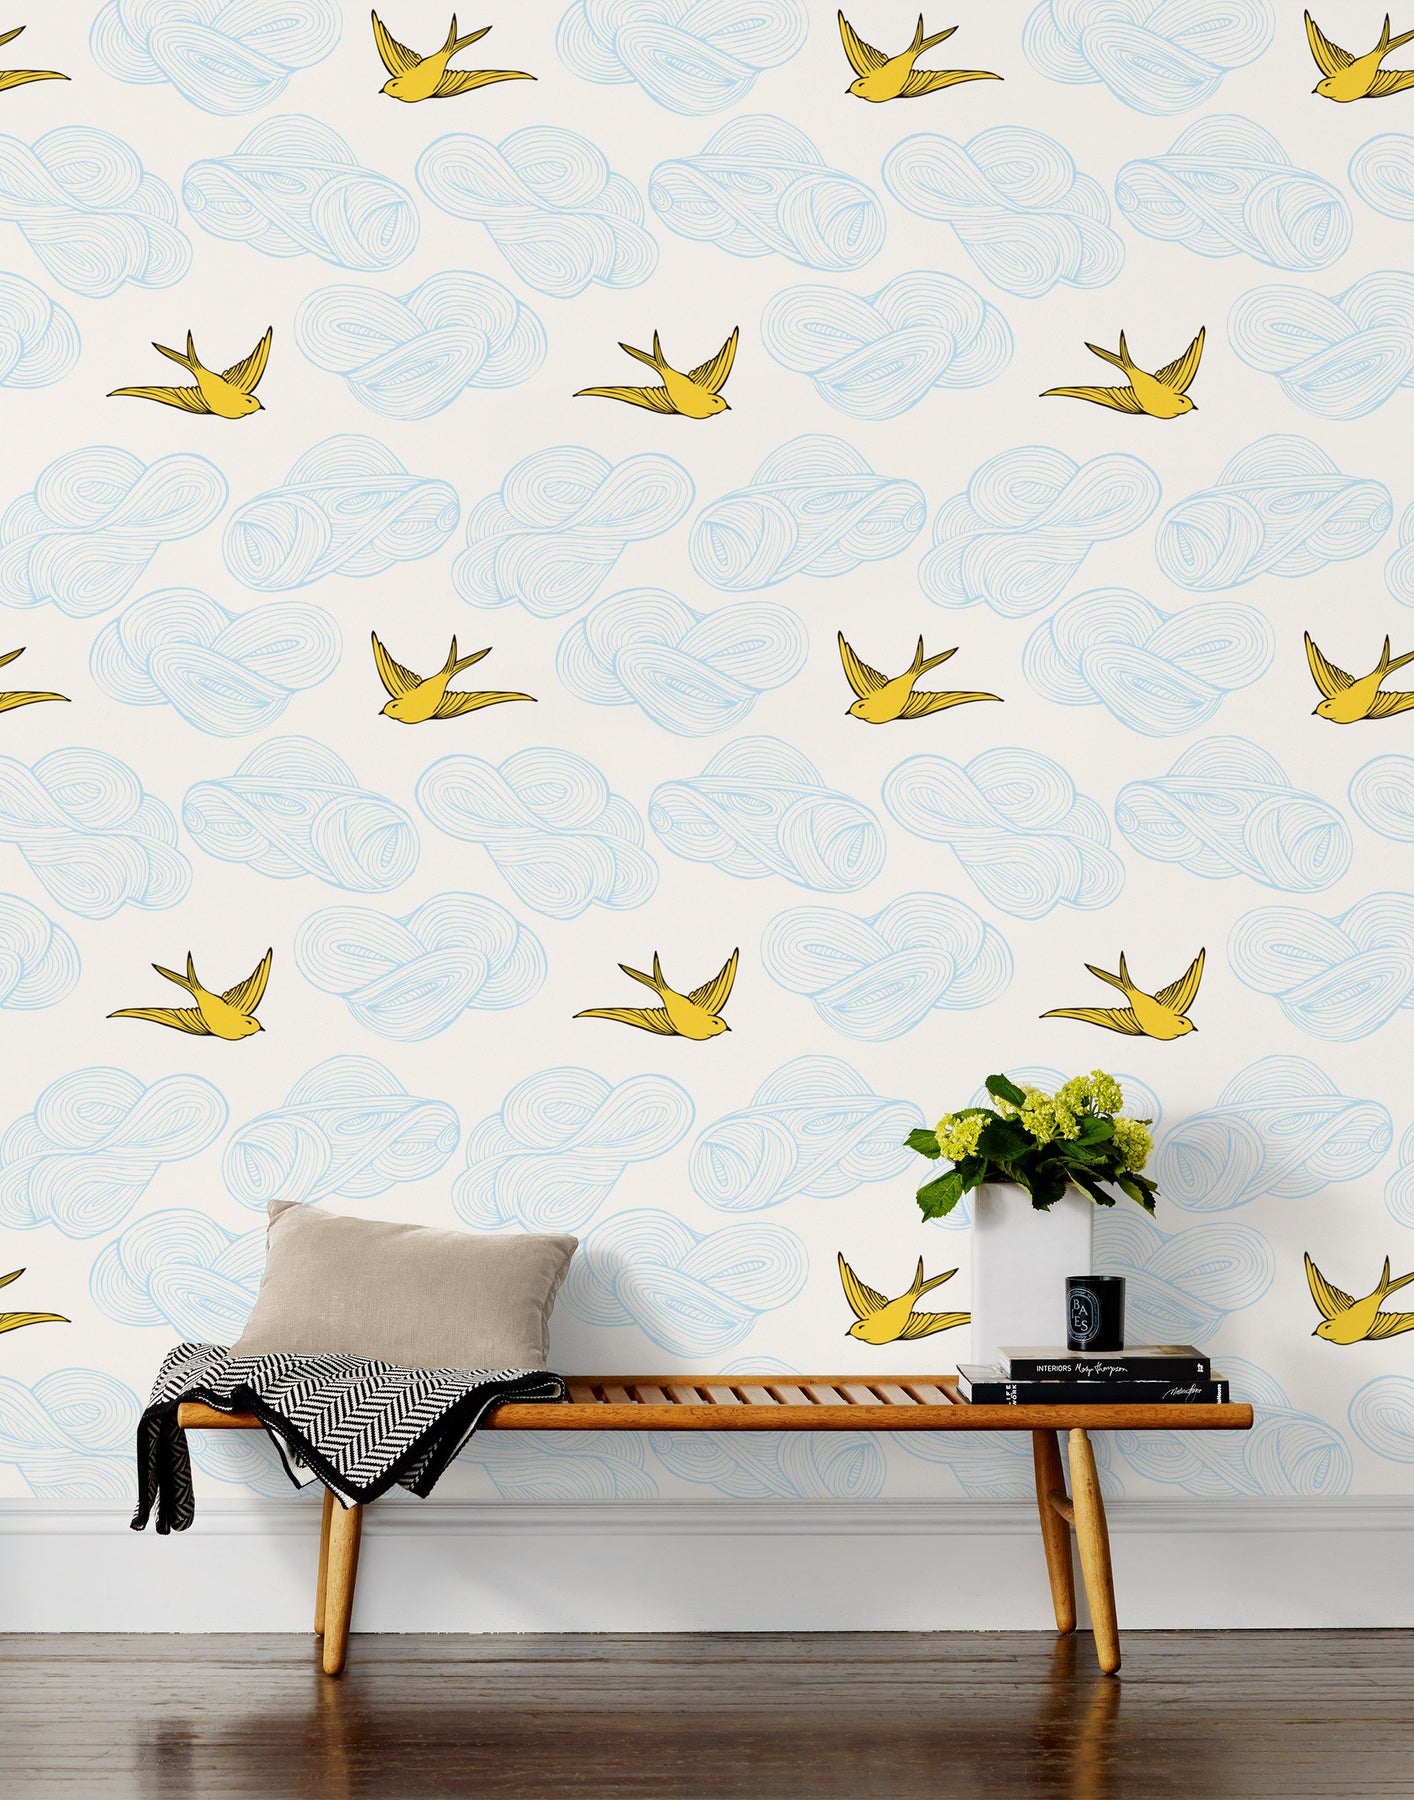 Peel and stick wallpaper hygee west